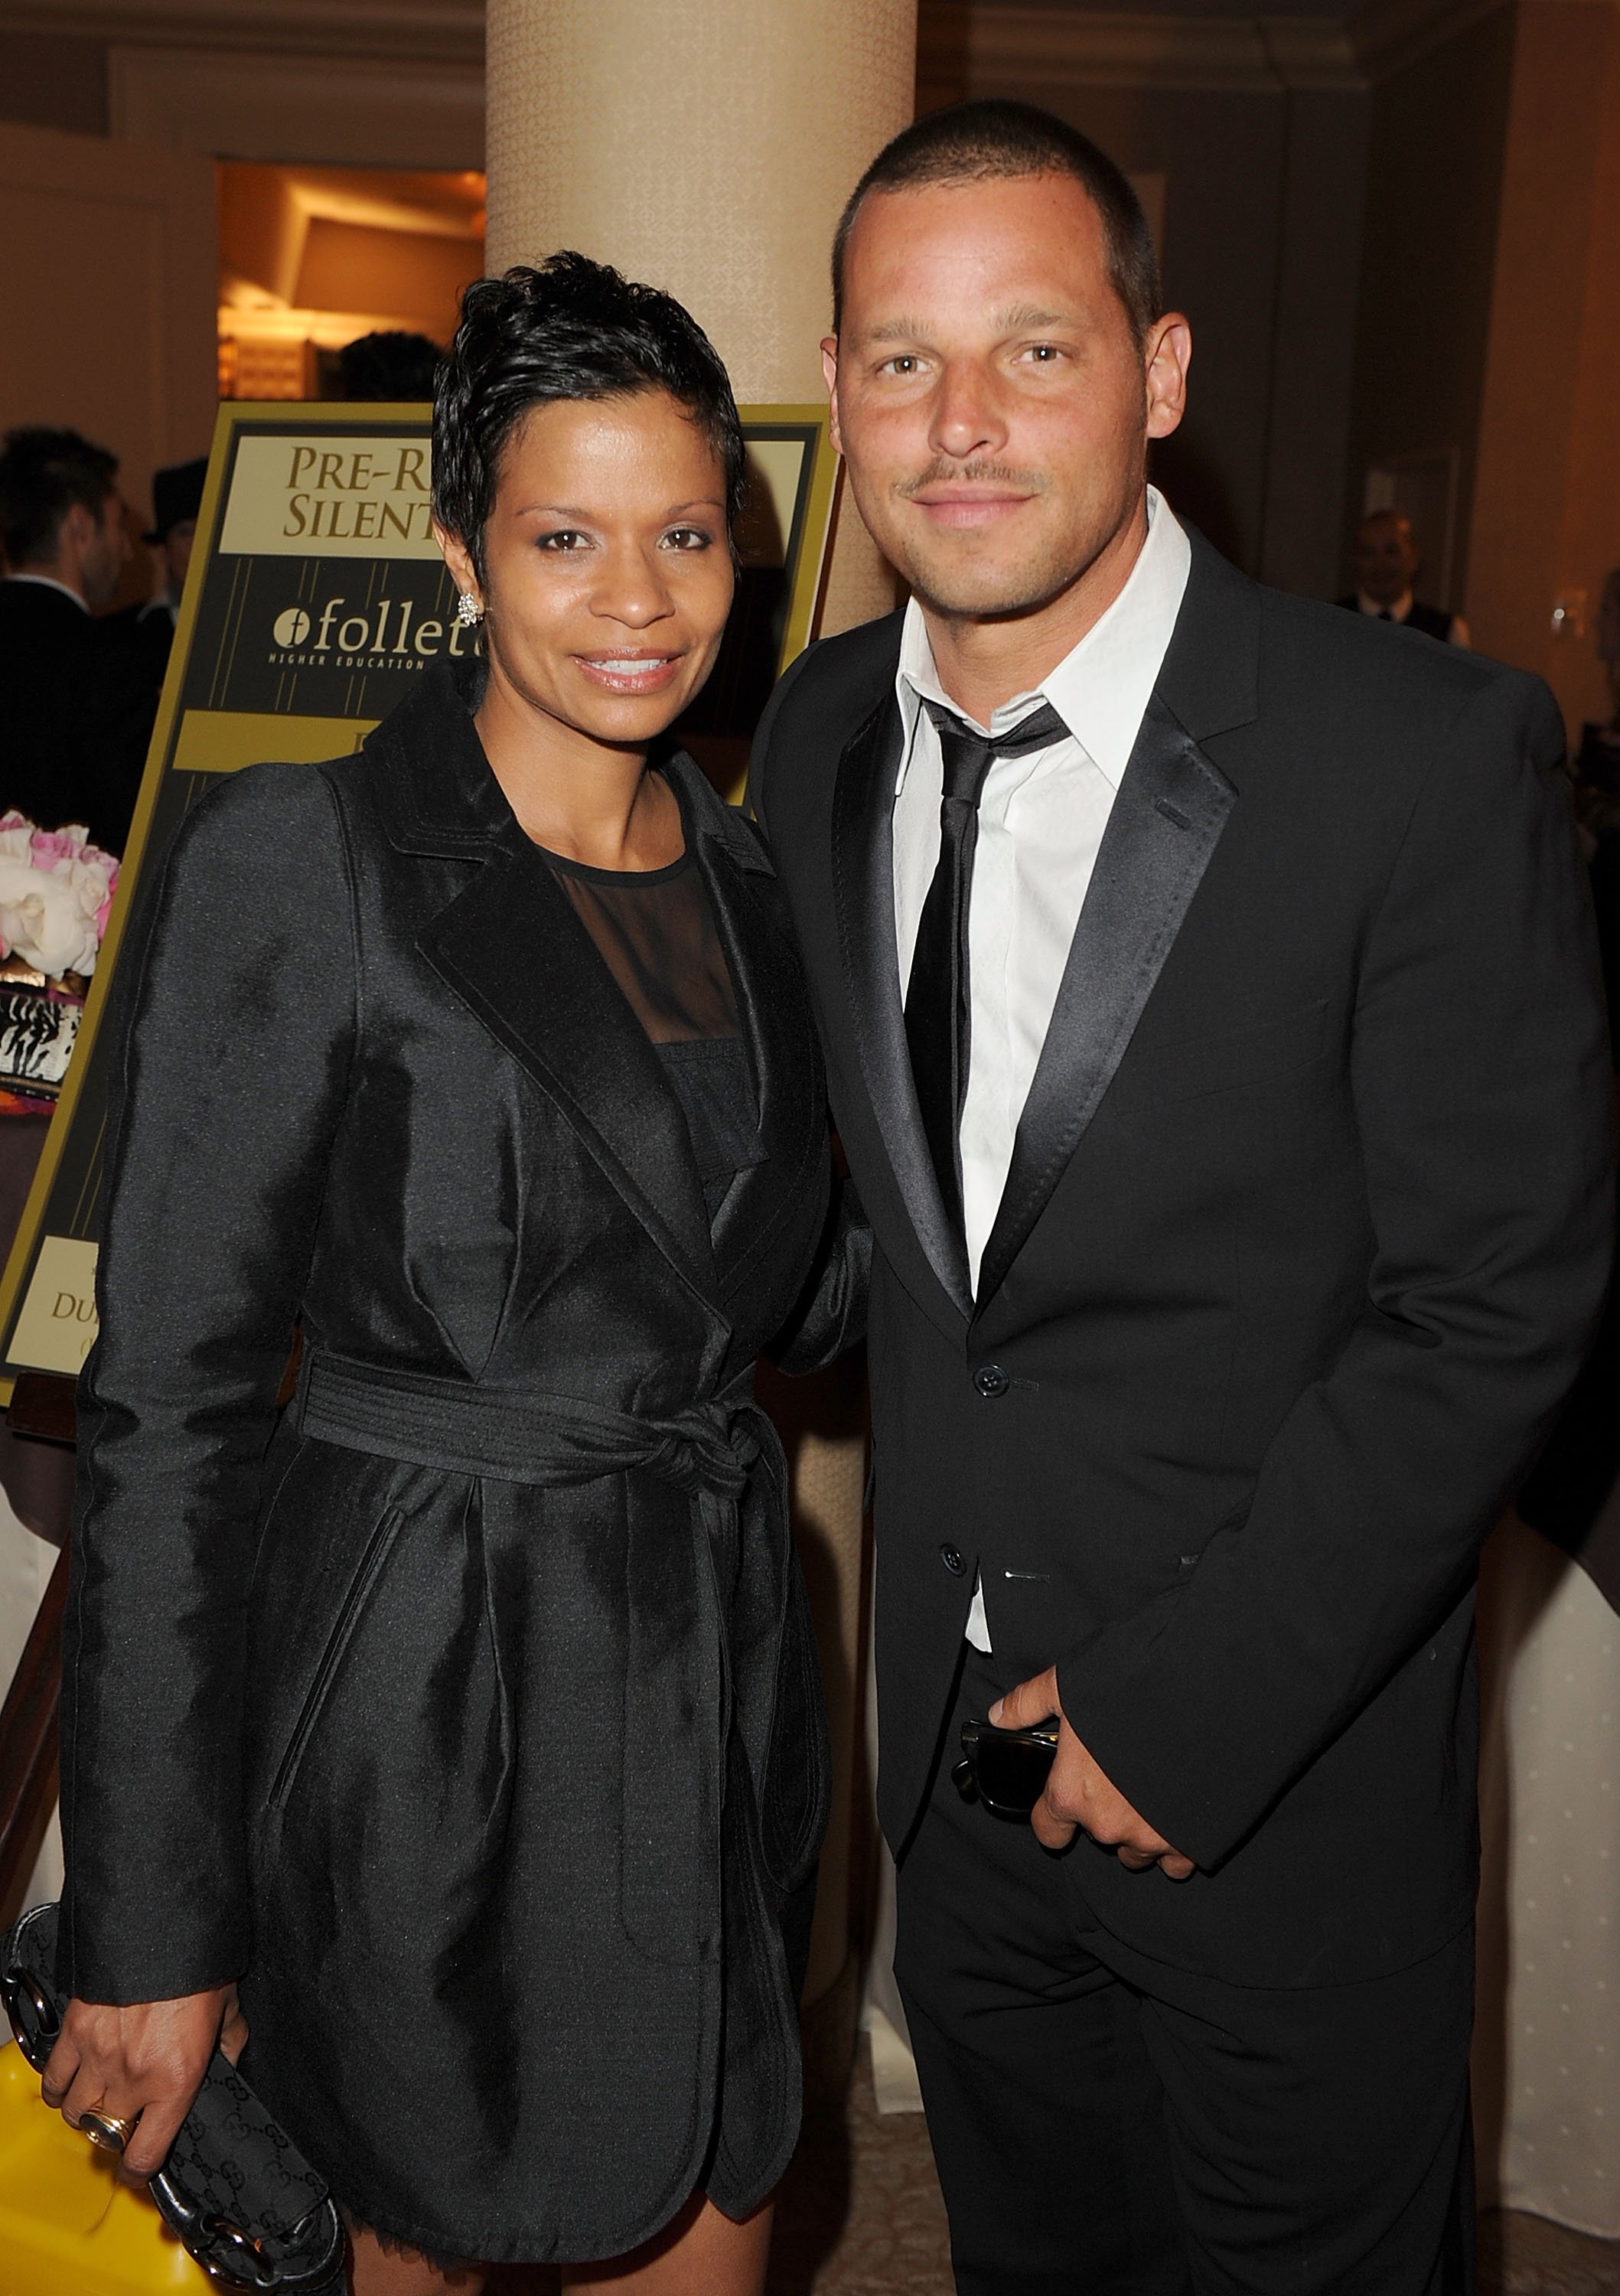 Justin Chambers and his wife Keisha Chambers attend the 2nd Annual Thirst Project Gala at The Beverly Hilton hotel on June 28, 2011, in Beverly Hills, California. | Source: Getty Images.